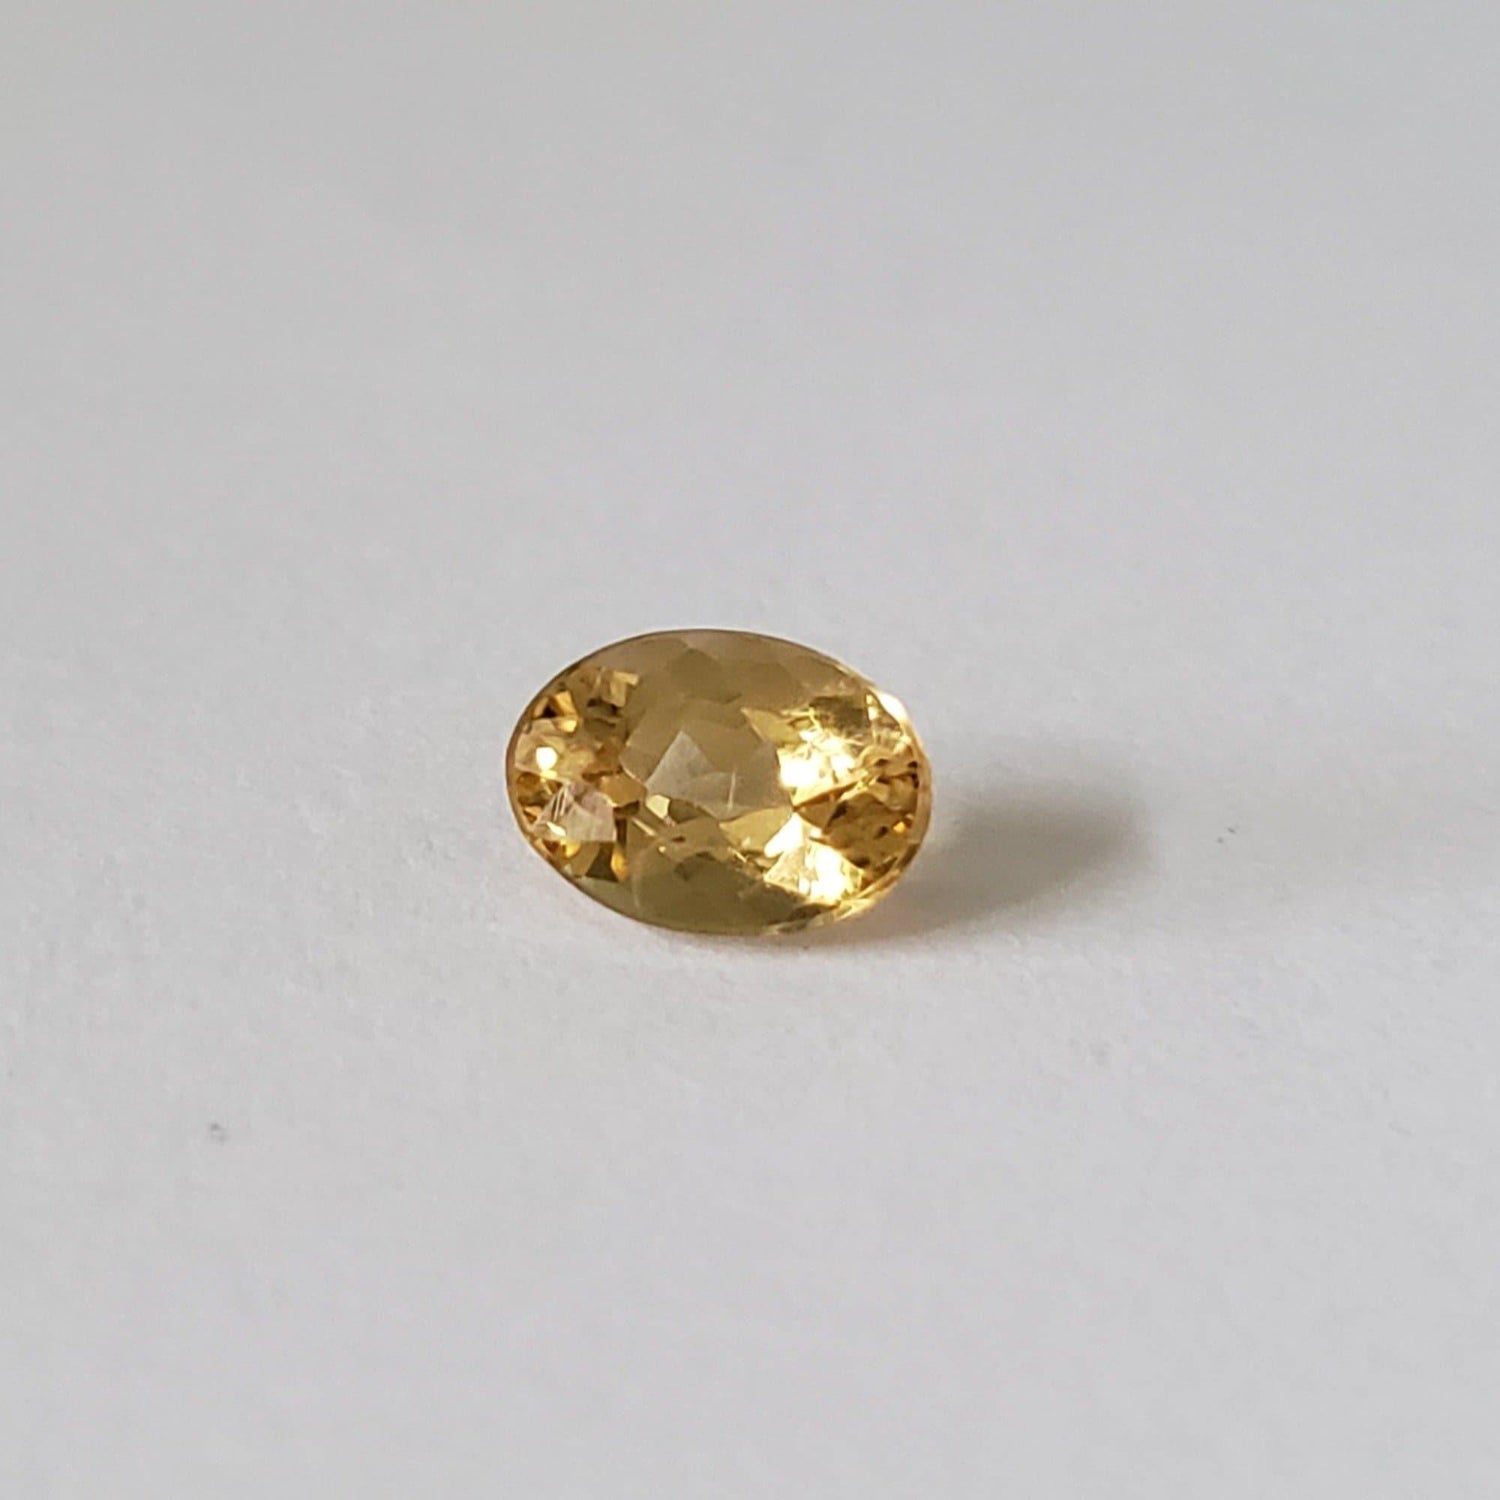 Imperial Topaz | Oval Cut | Orange | 7x5mm | Appraisal included